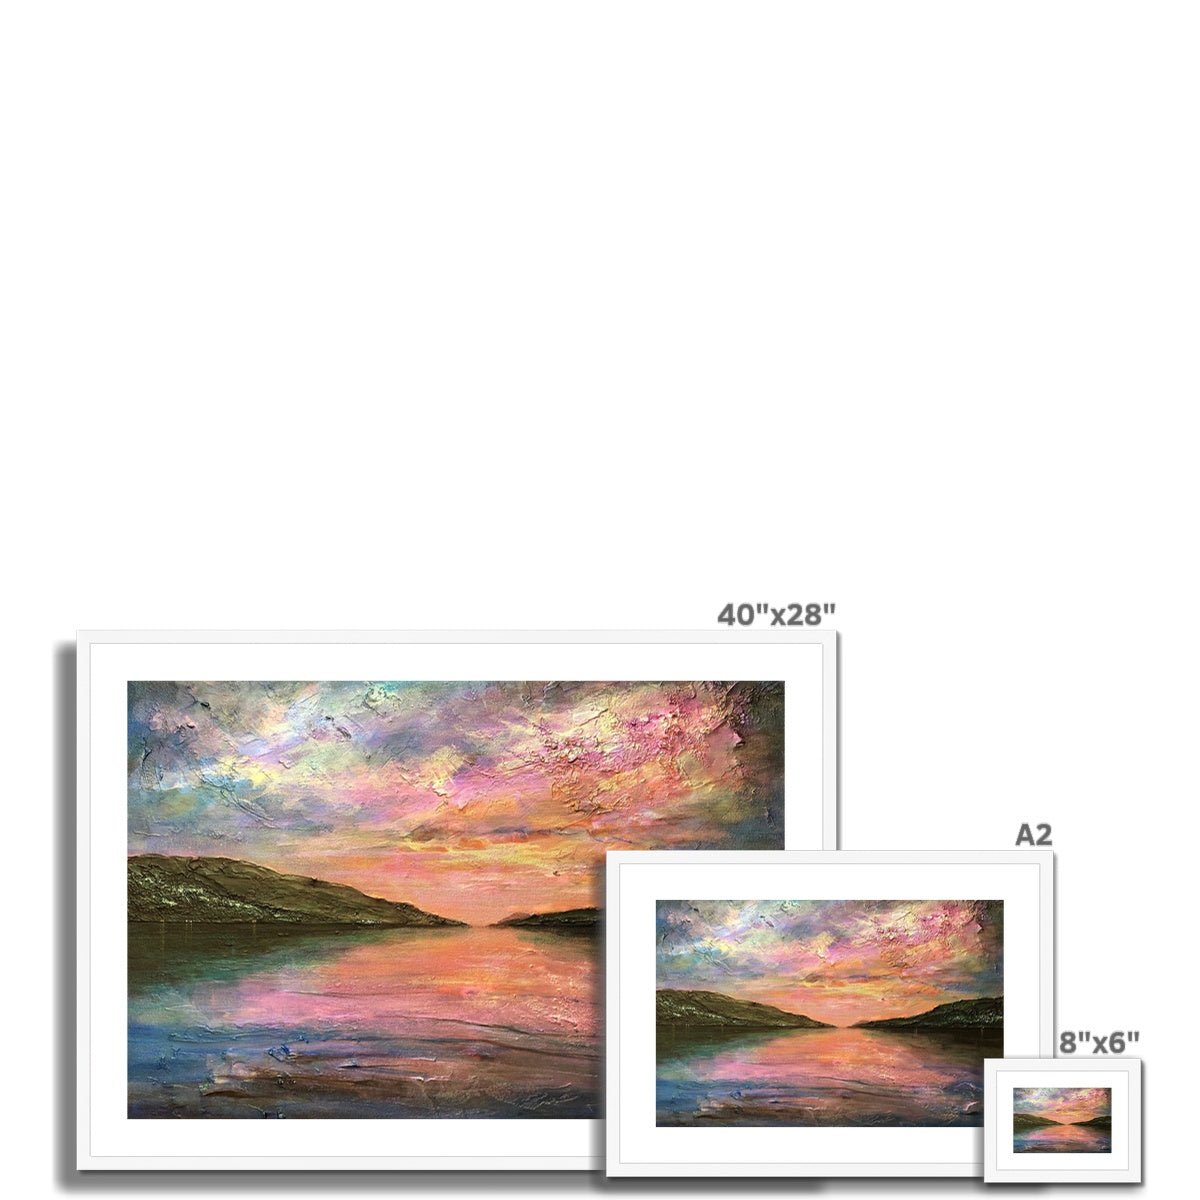 Loch Ness Dawn Painting | Framed & Mounted Prints From Scotland-Framed & Mounted Prints-Scottish Lochs & Mountains Art Gallery-Paintings, Prints, Homeware, Art Gifts From Scotland By Scottish Artist Kevin Hunter